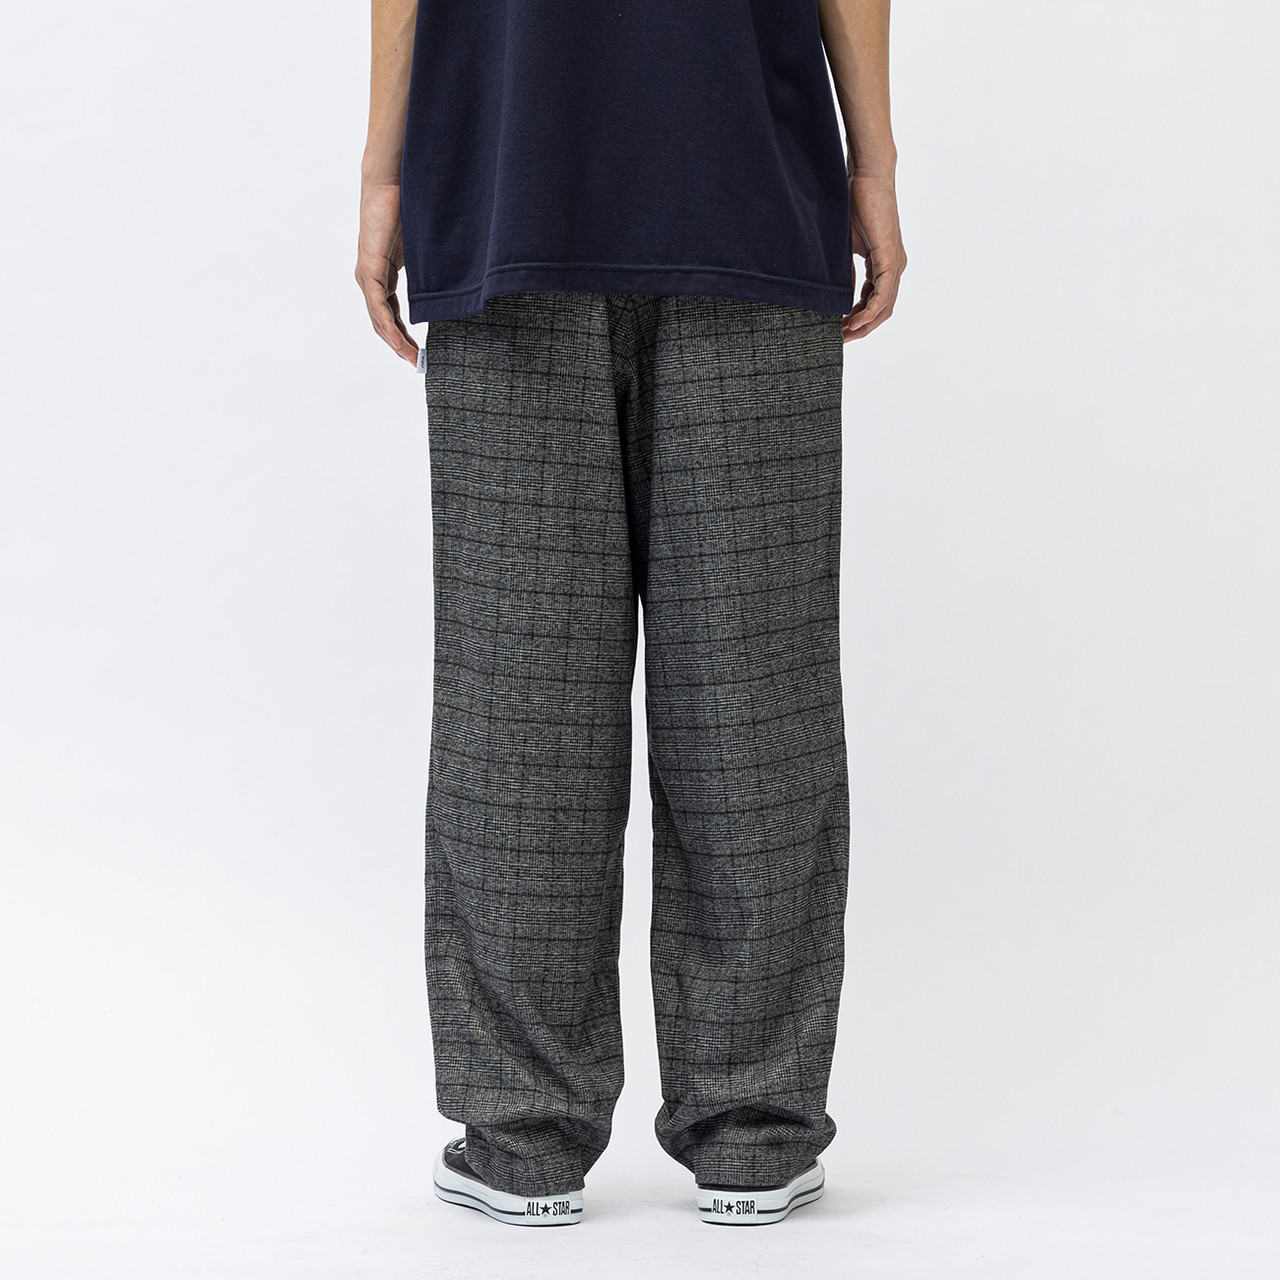 WTAPS Trousers WRKT2001 / TROUSERS / PLRA. TWILL. TEXTILE